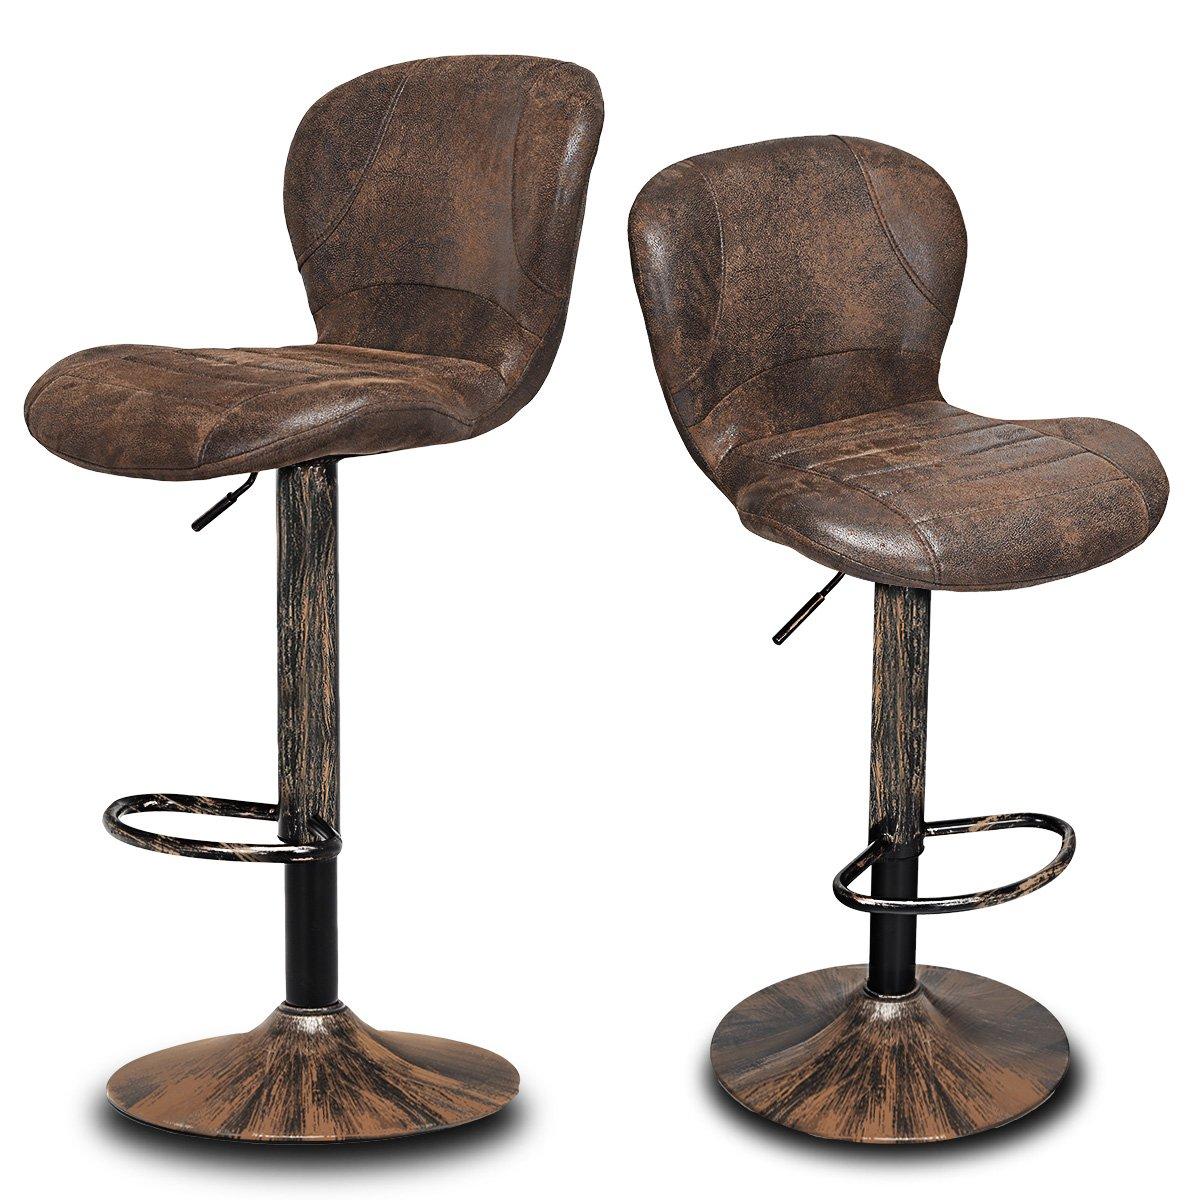 Set of 2 Bar Stools Adjustable Swivel Leather Pub Chair Kitchen Dining Chairs